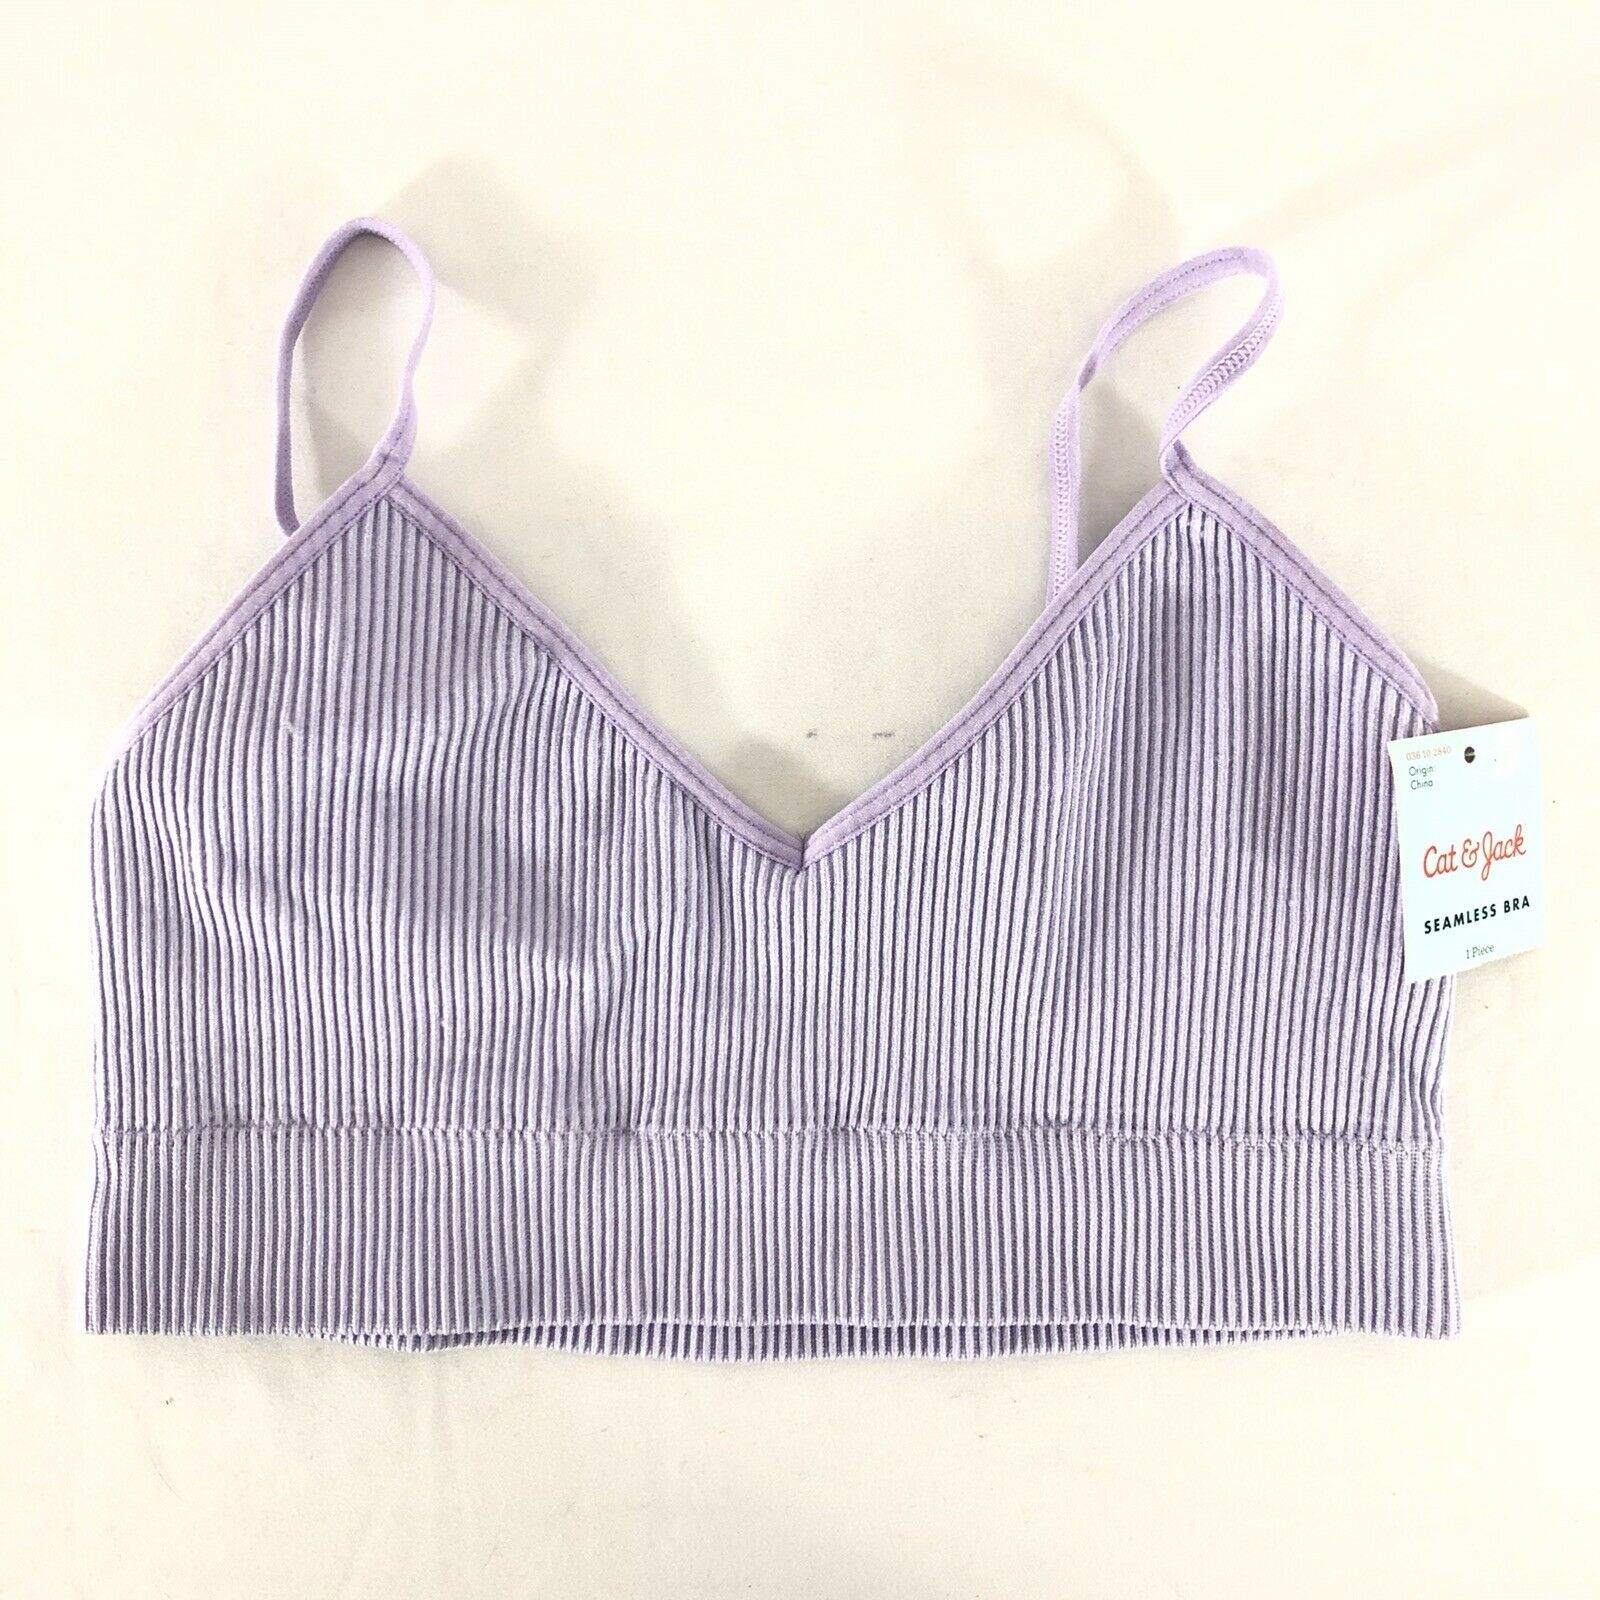 Primary image for Cat & Jack Girls Seamless bra Ribbed Purple Size M